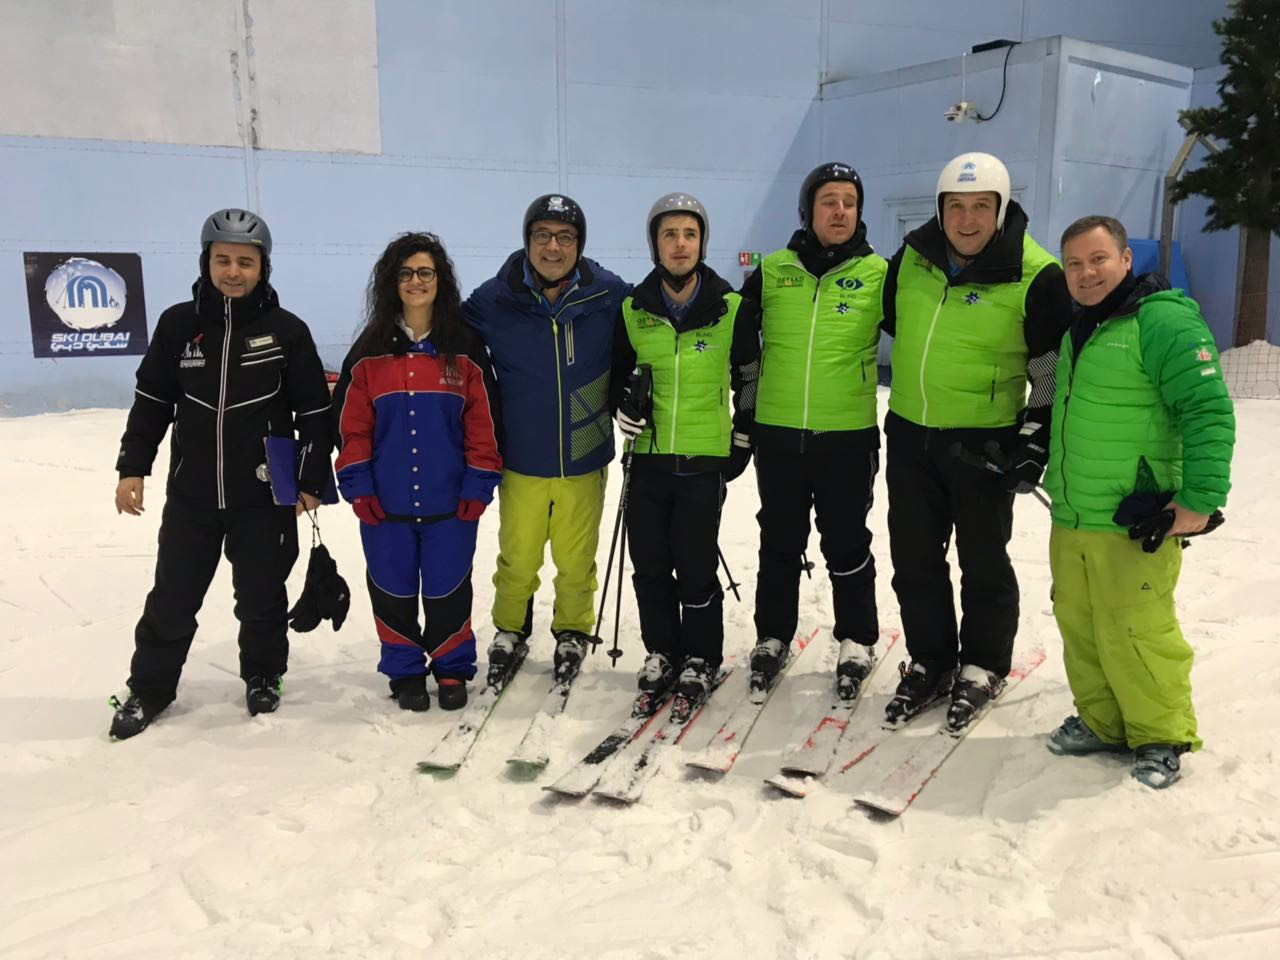 The team of blind skiers and their guides at Ski Dubai